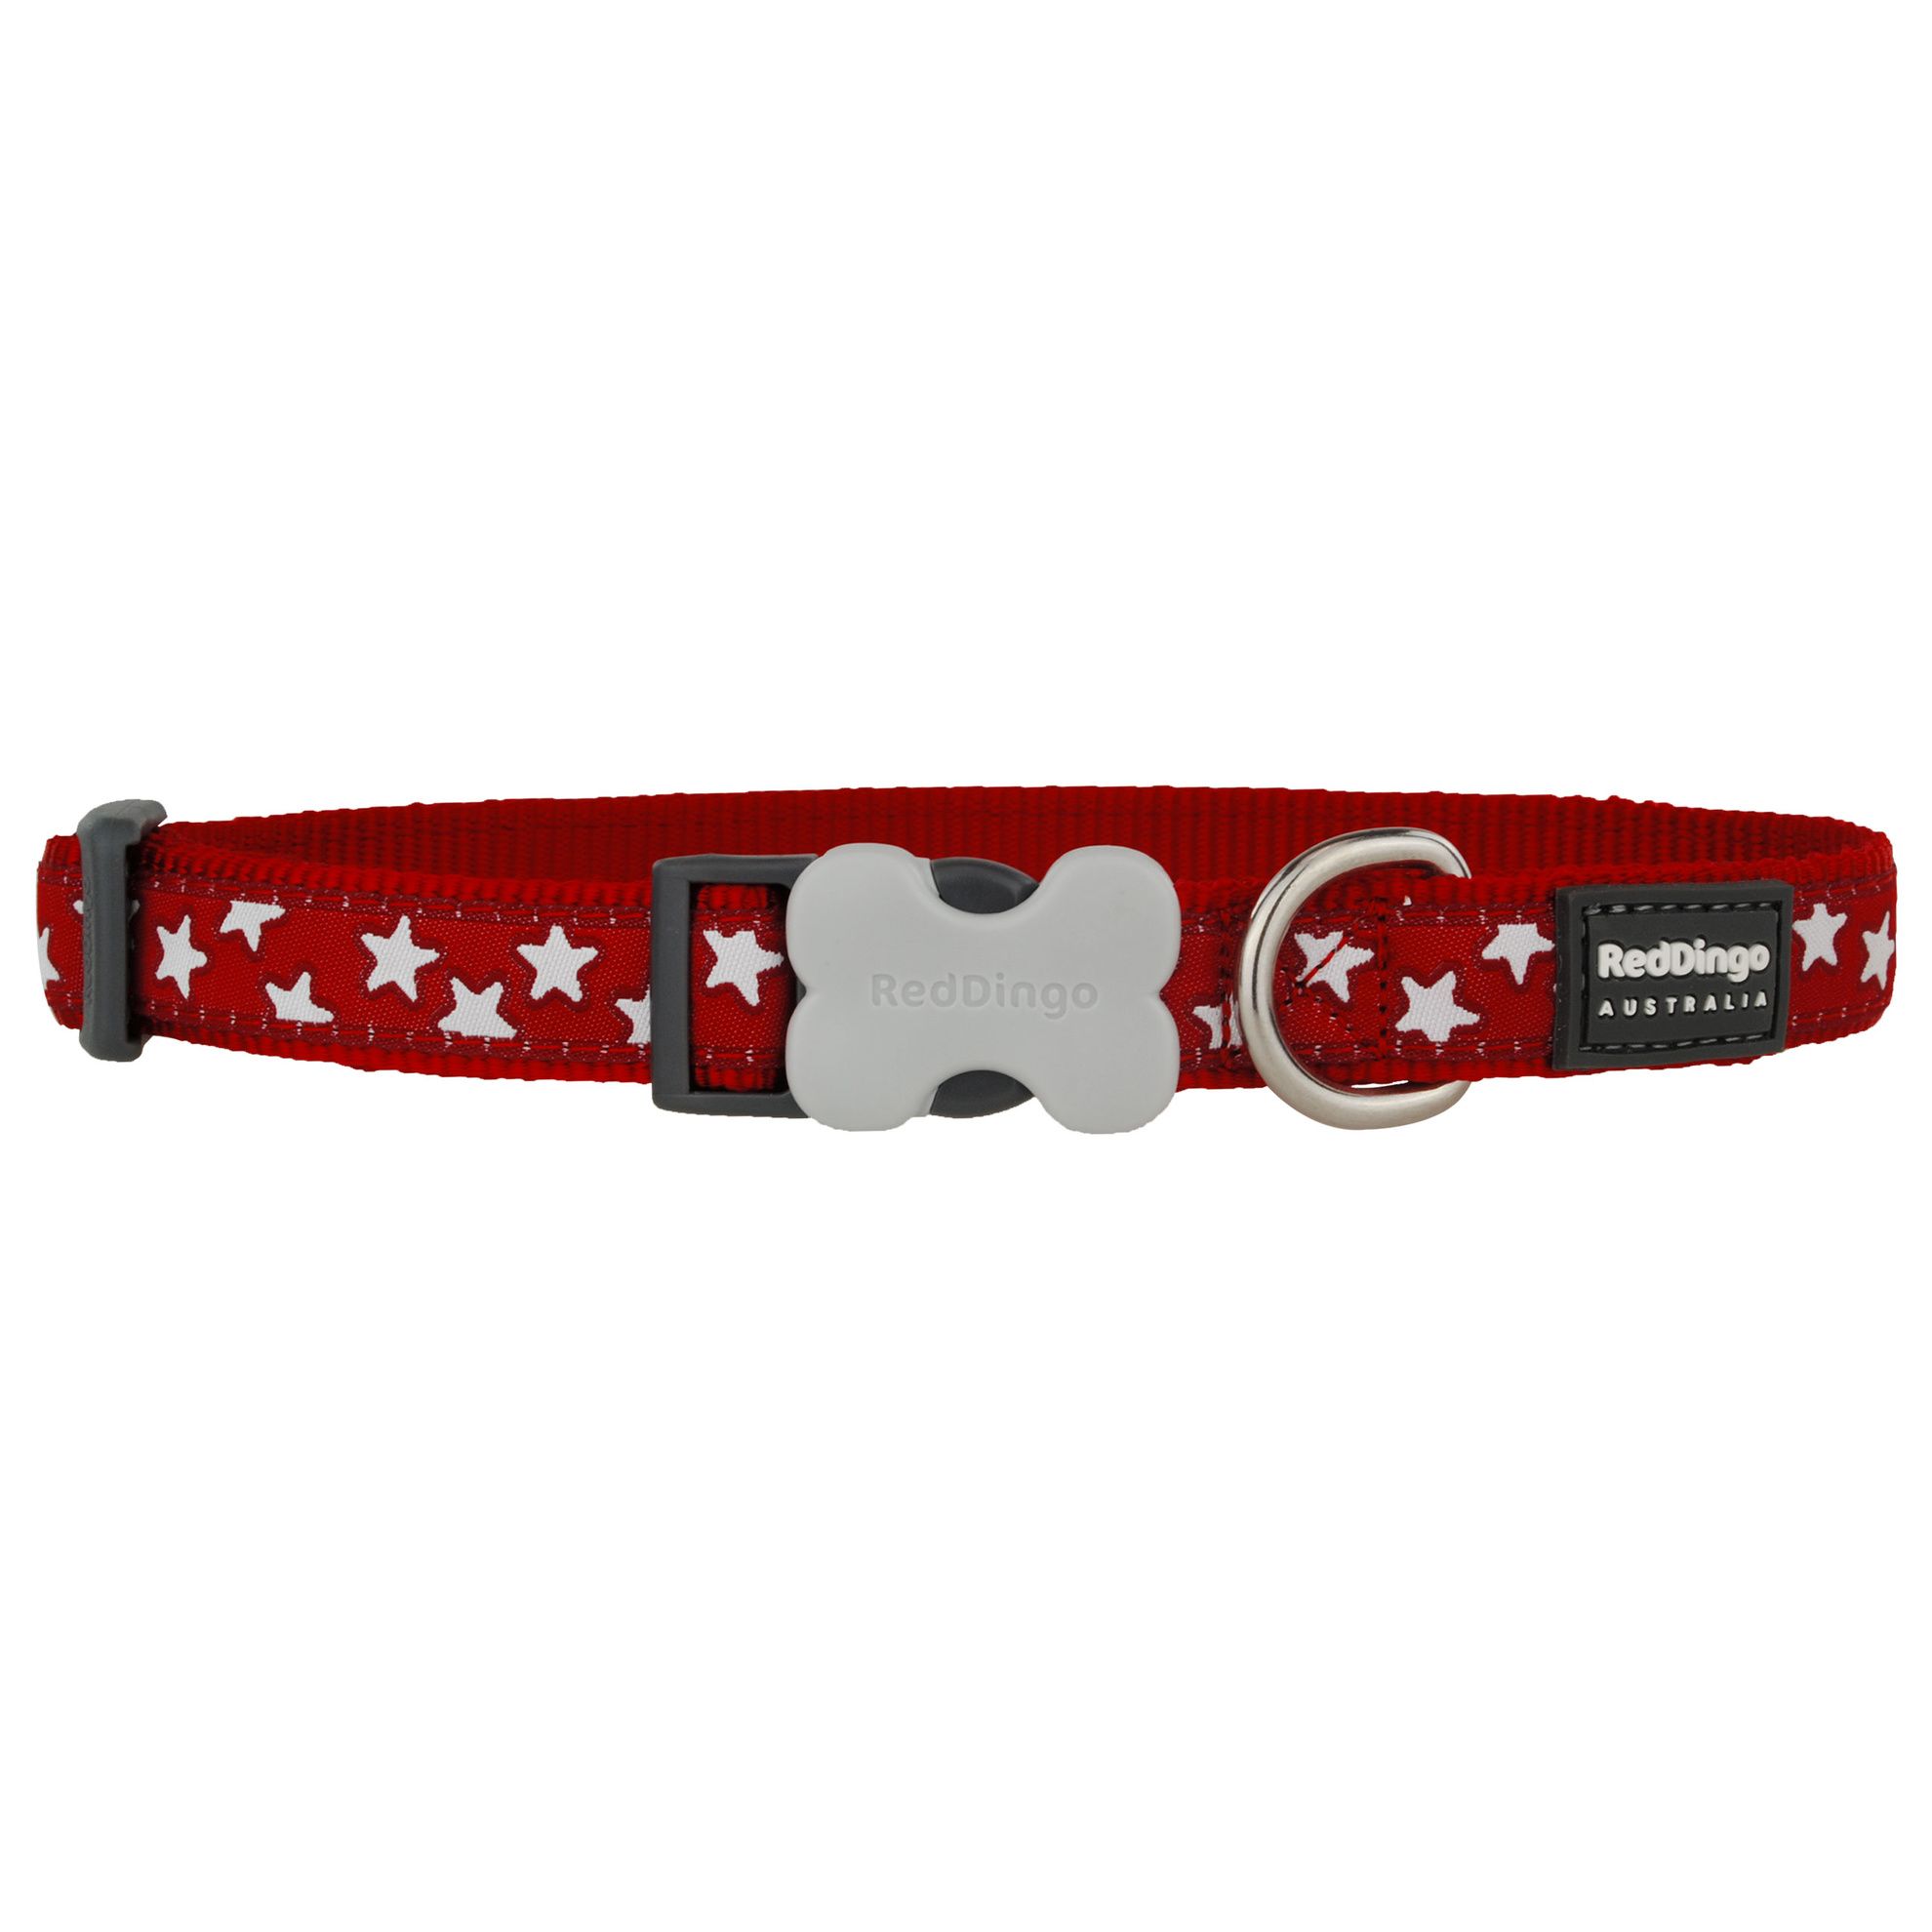 Collier fantaisie Rouge Etoiles Blanches - Red Dingo